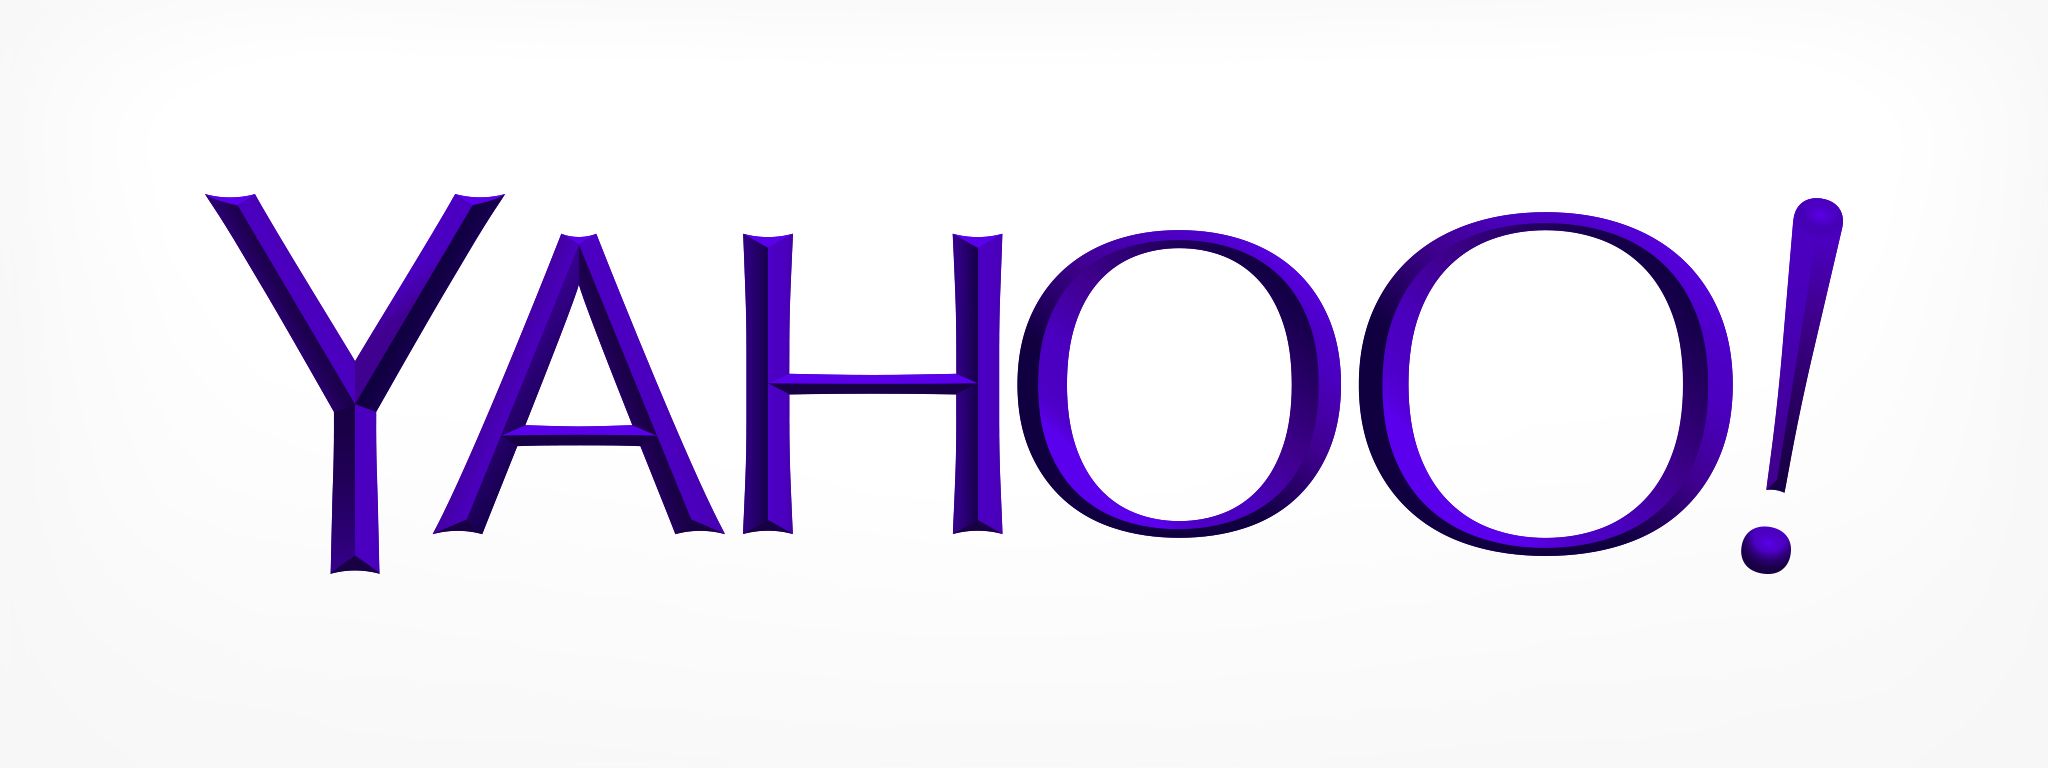 yahoo clipart images - photo #4